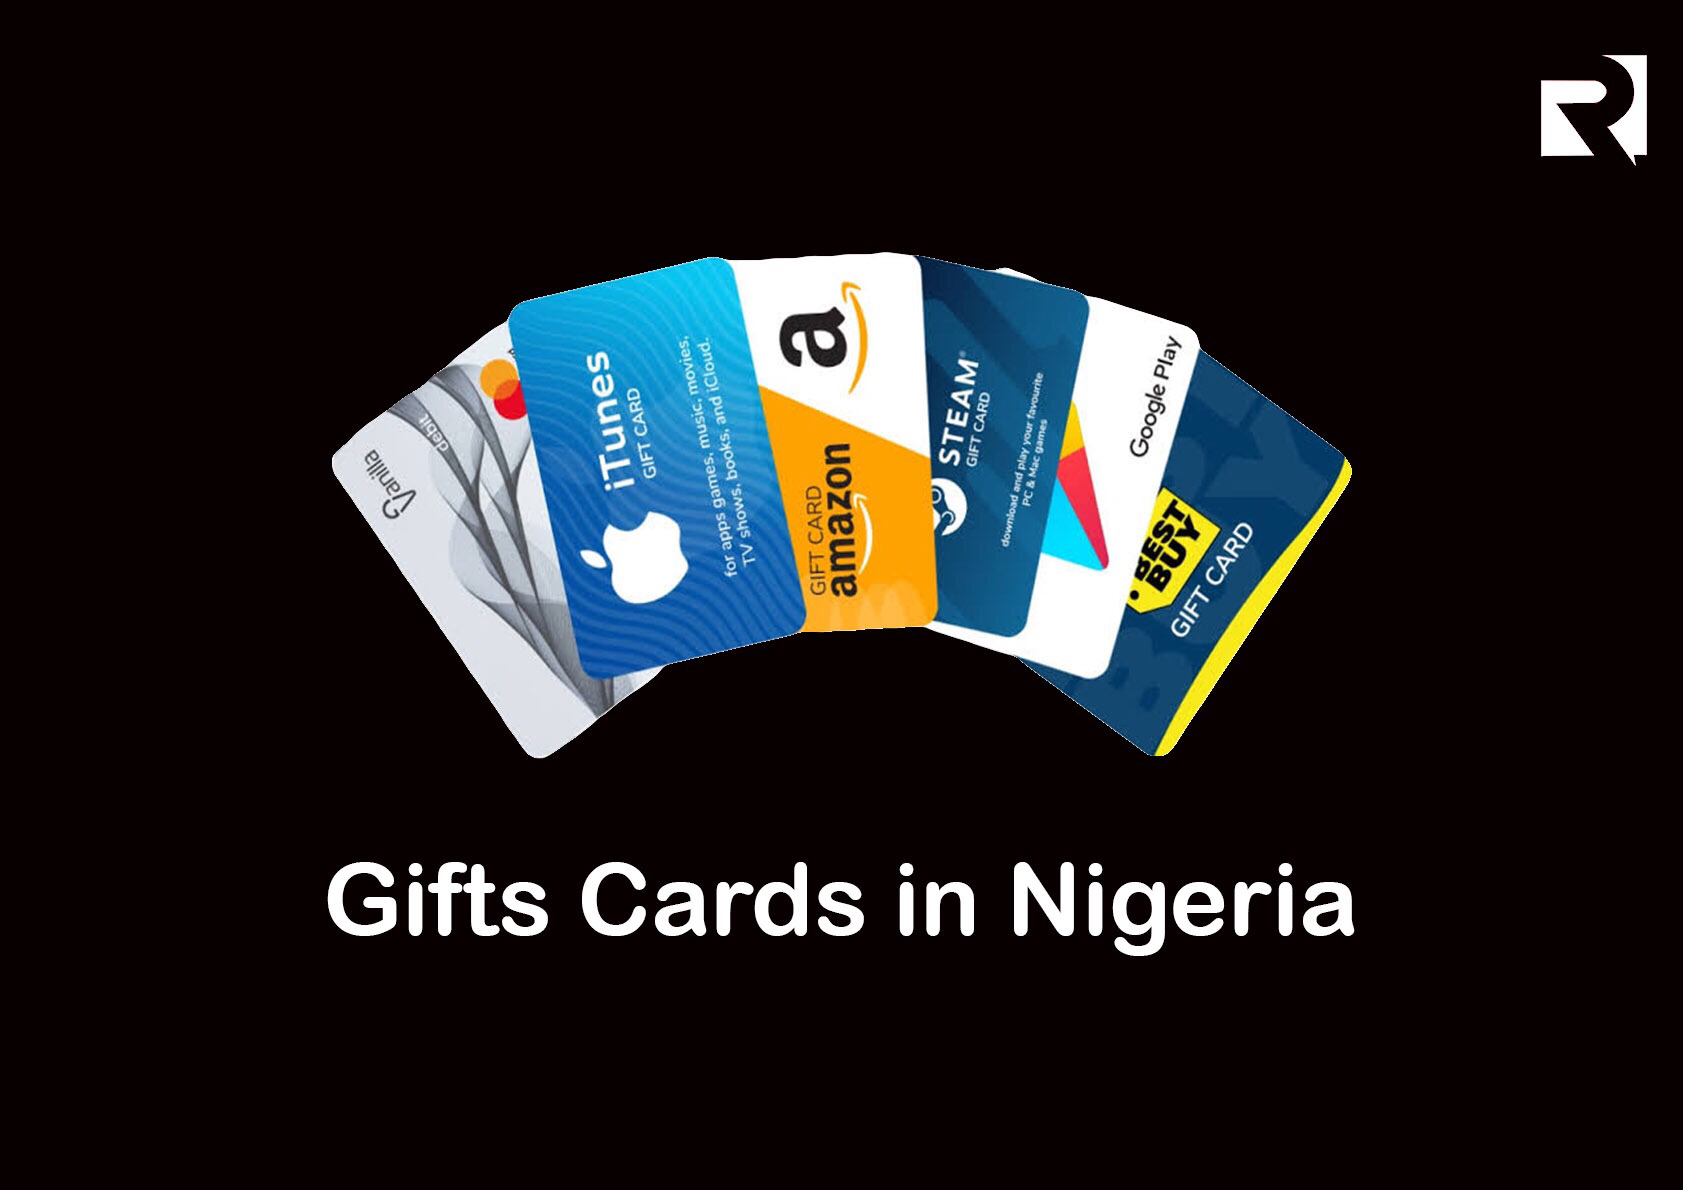 Gift Cards in Nigeria